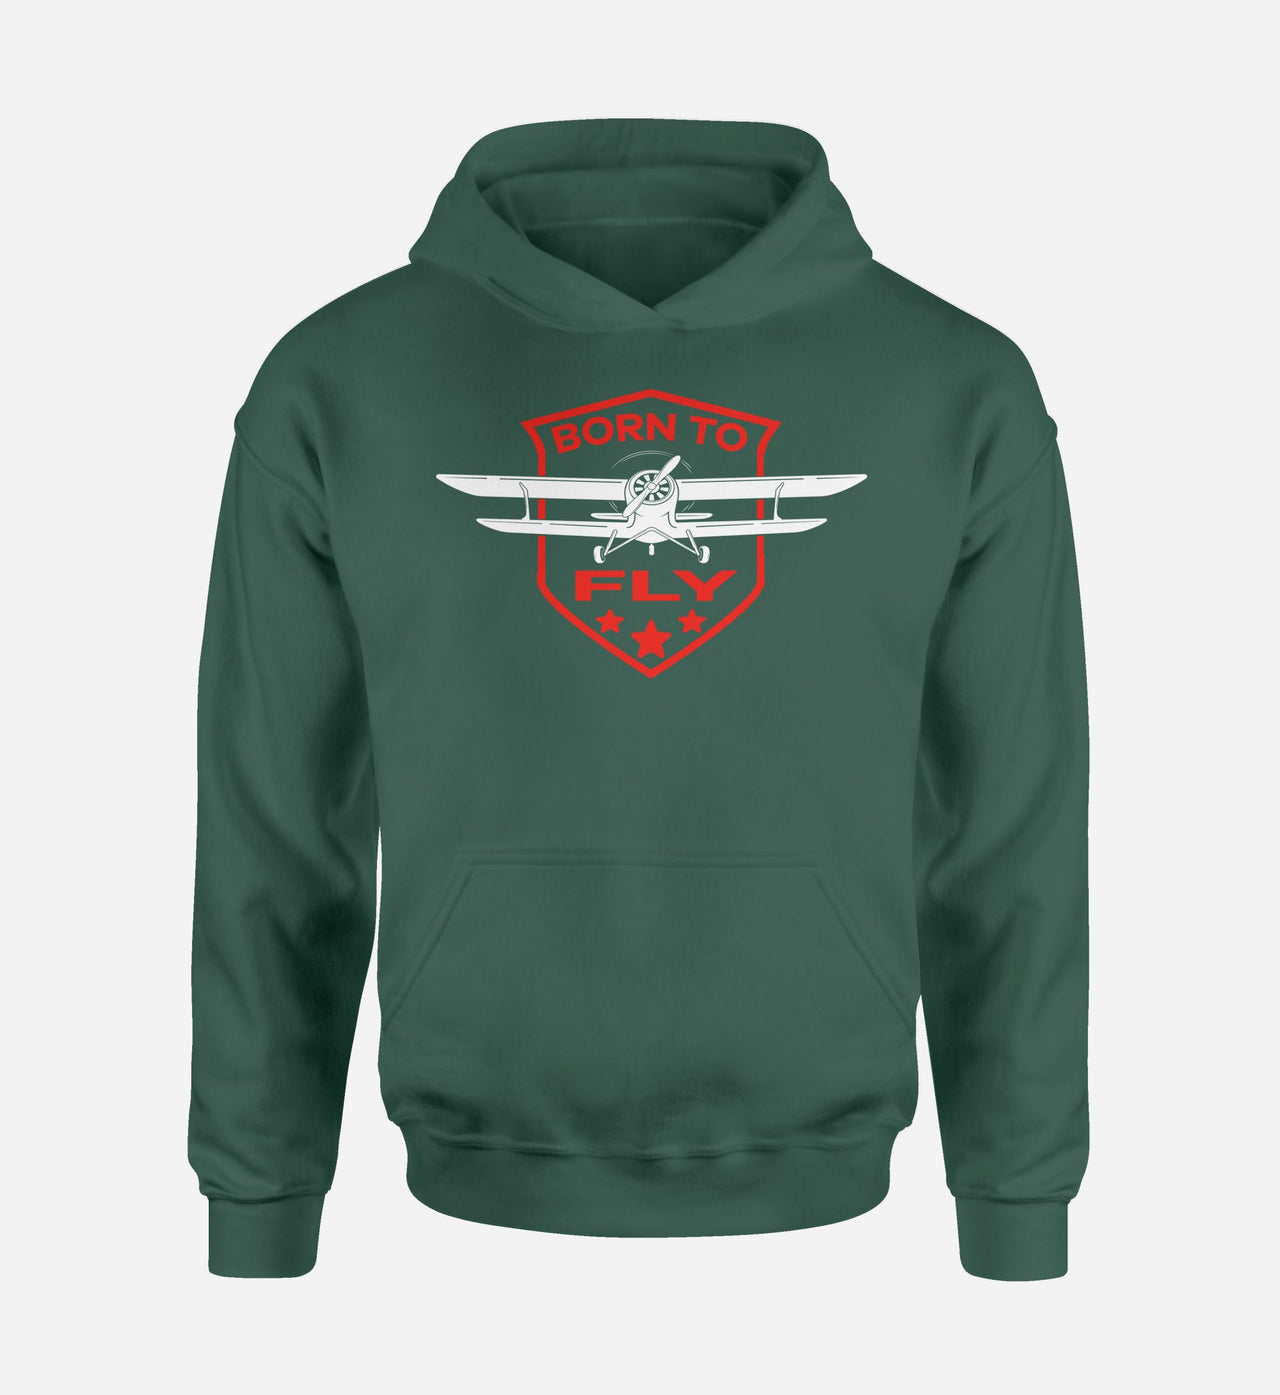 Super Born To Fly Designed Hoodies